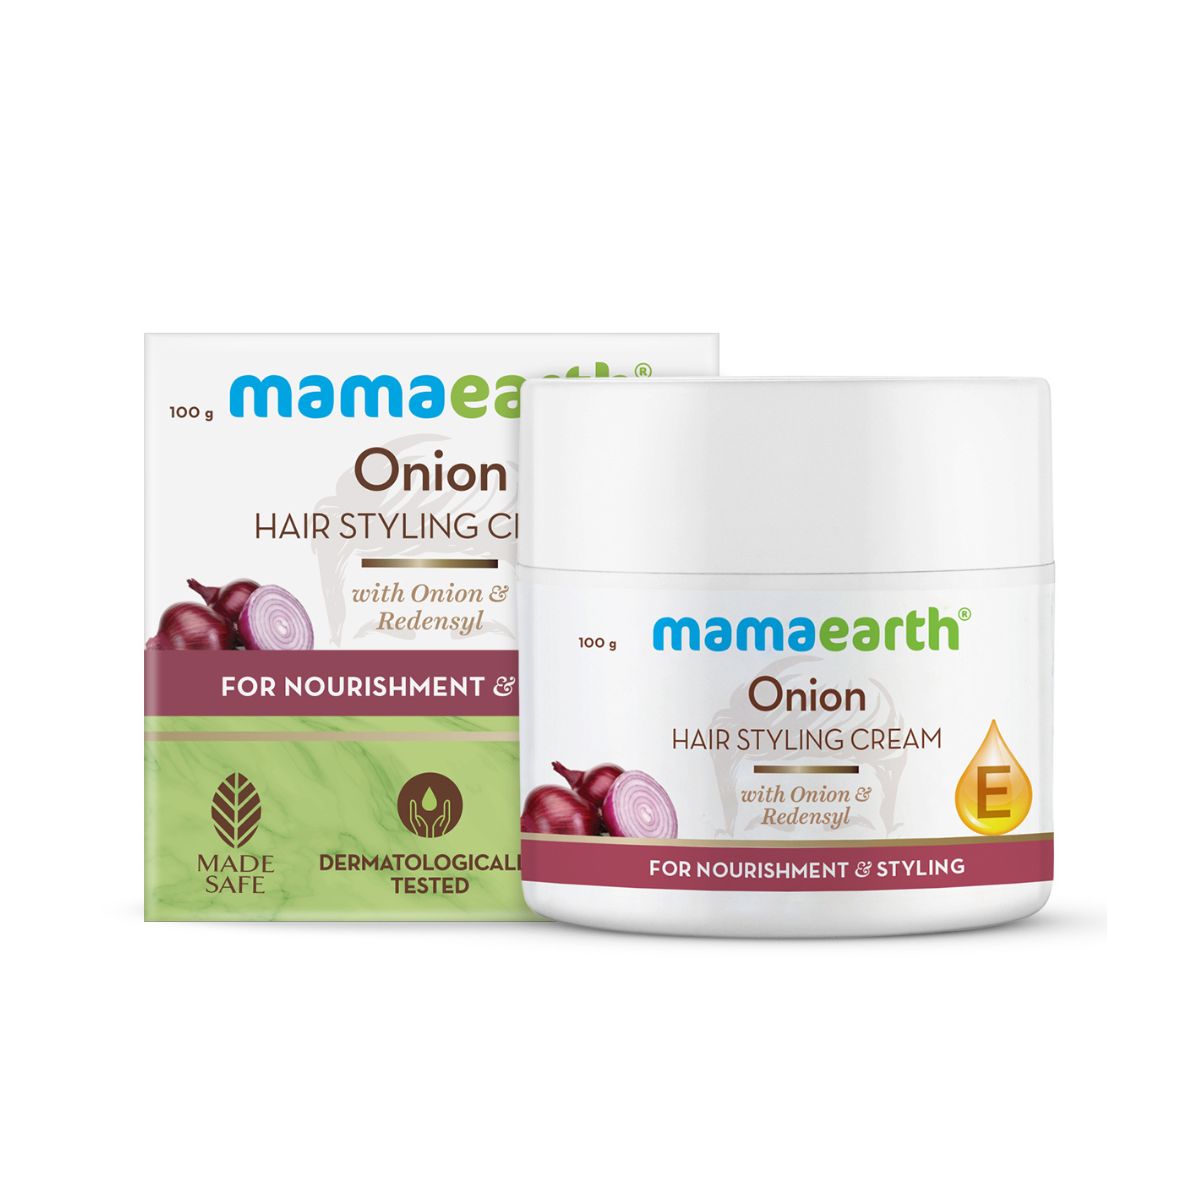 Mamaearth Onion Hair Styling Cream With Onion & Redensyl For Nourishment & Styling - 100g